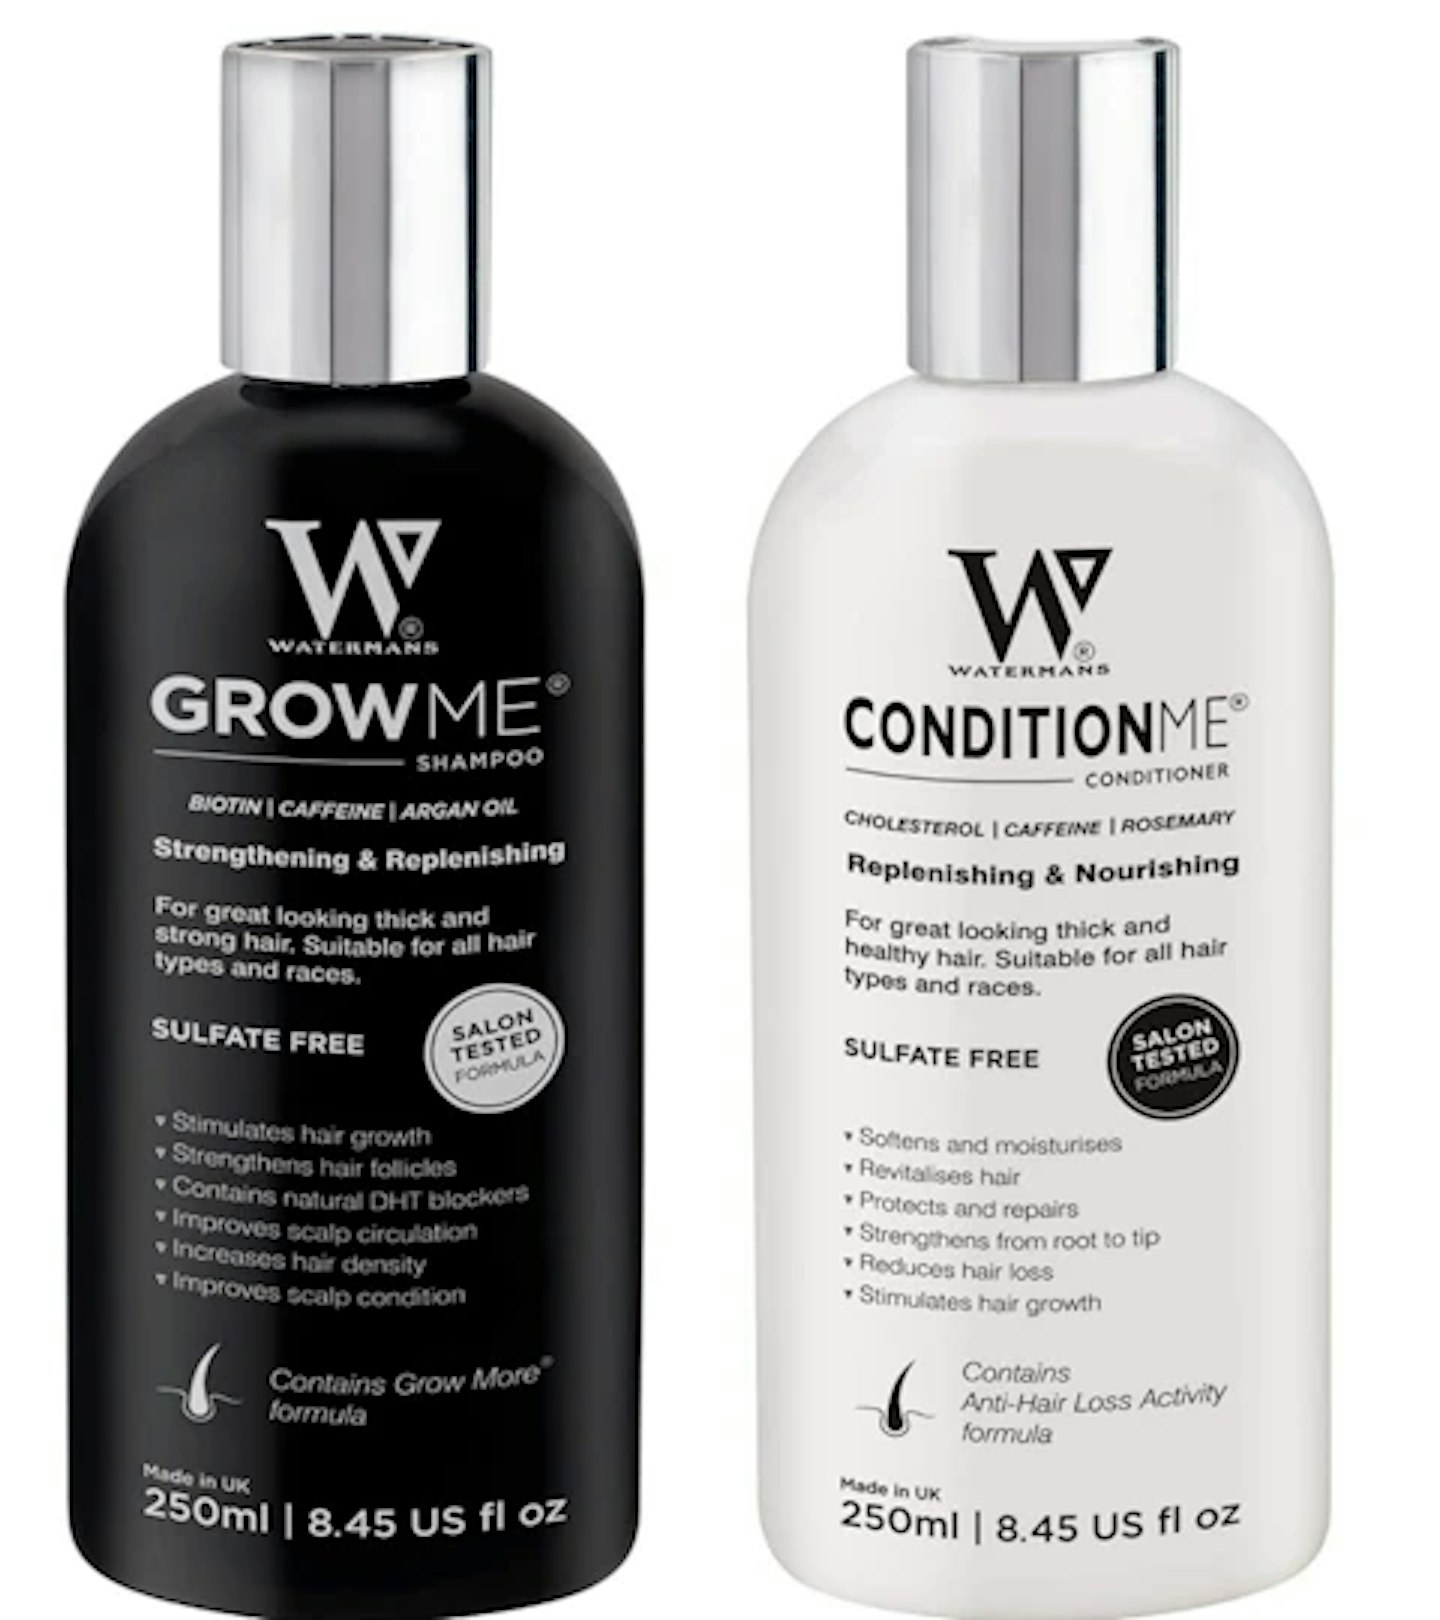 Watermans Hair Growth Shampoo and Conditioner bundle 